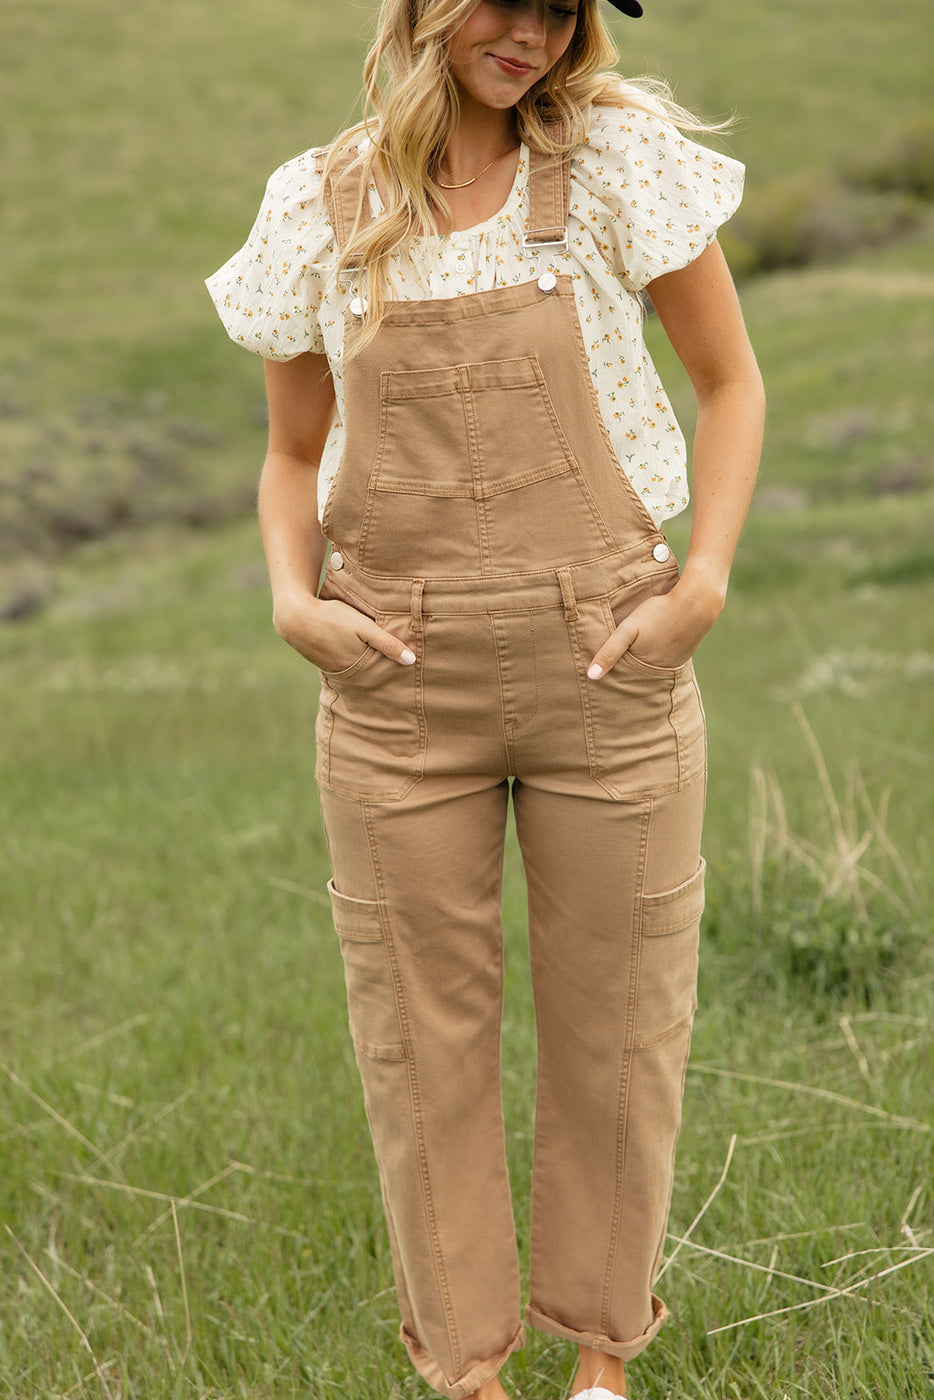 a woman in overalls standing in a field